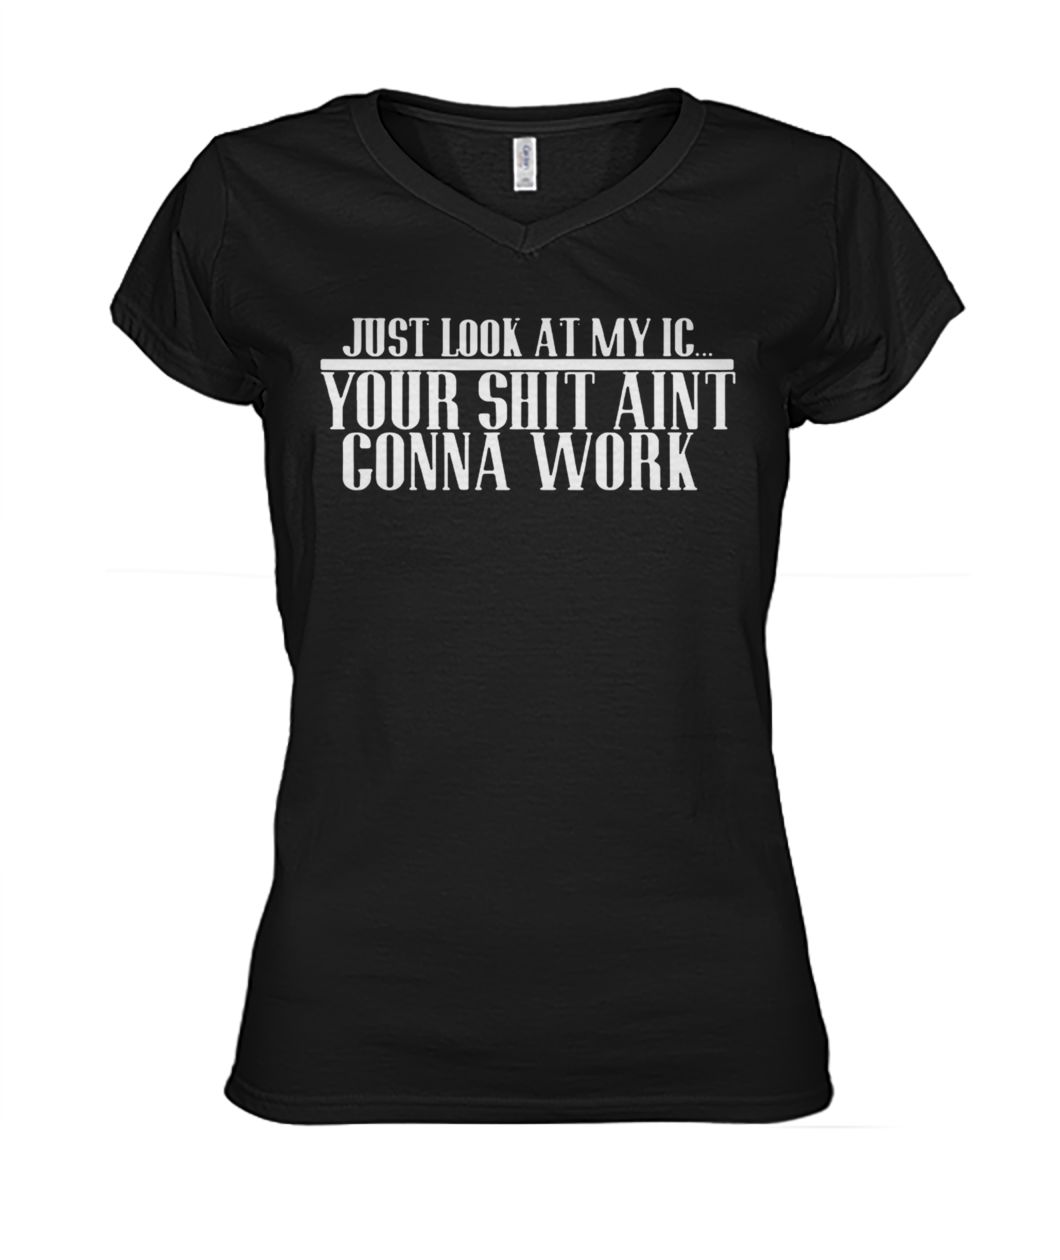 Just look at my IC your shit ain't gonna work women's v-neck